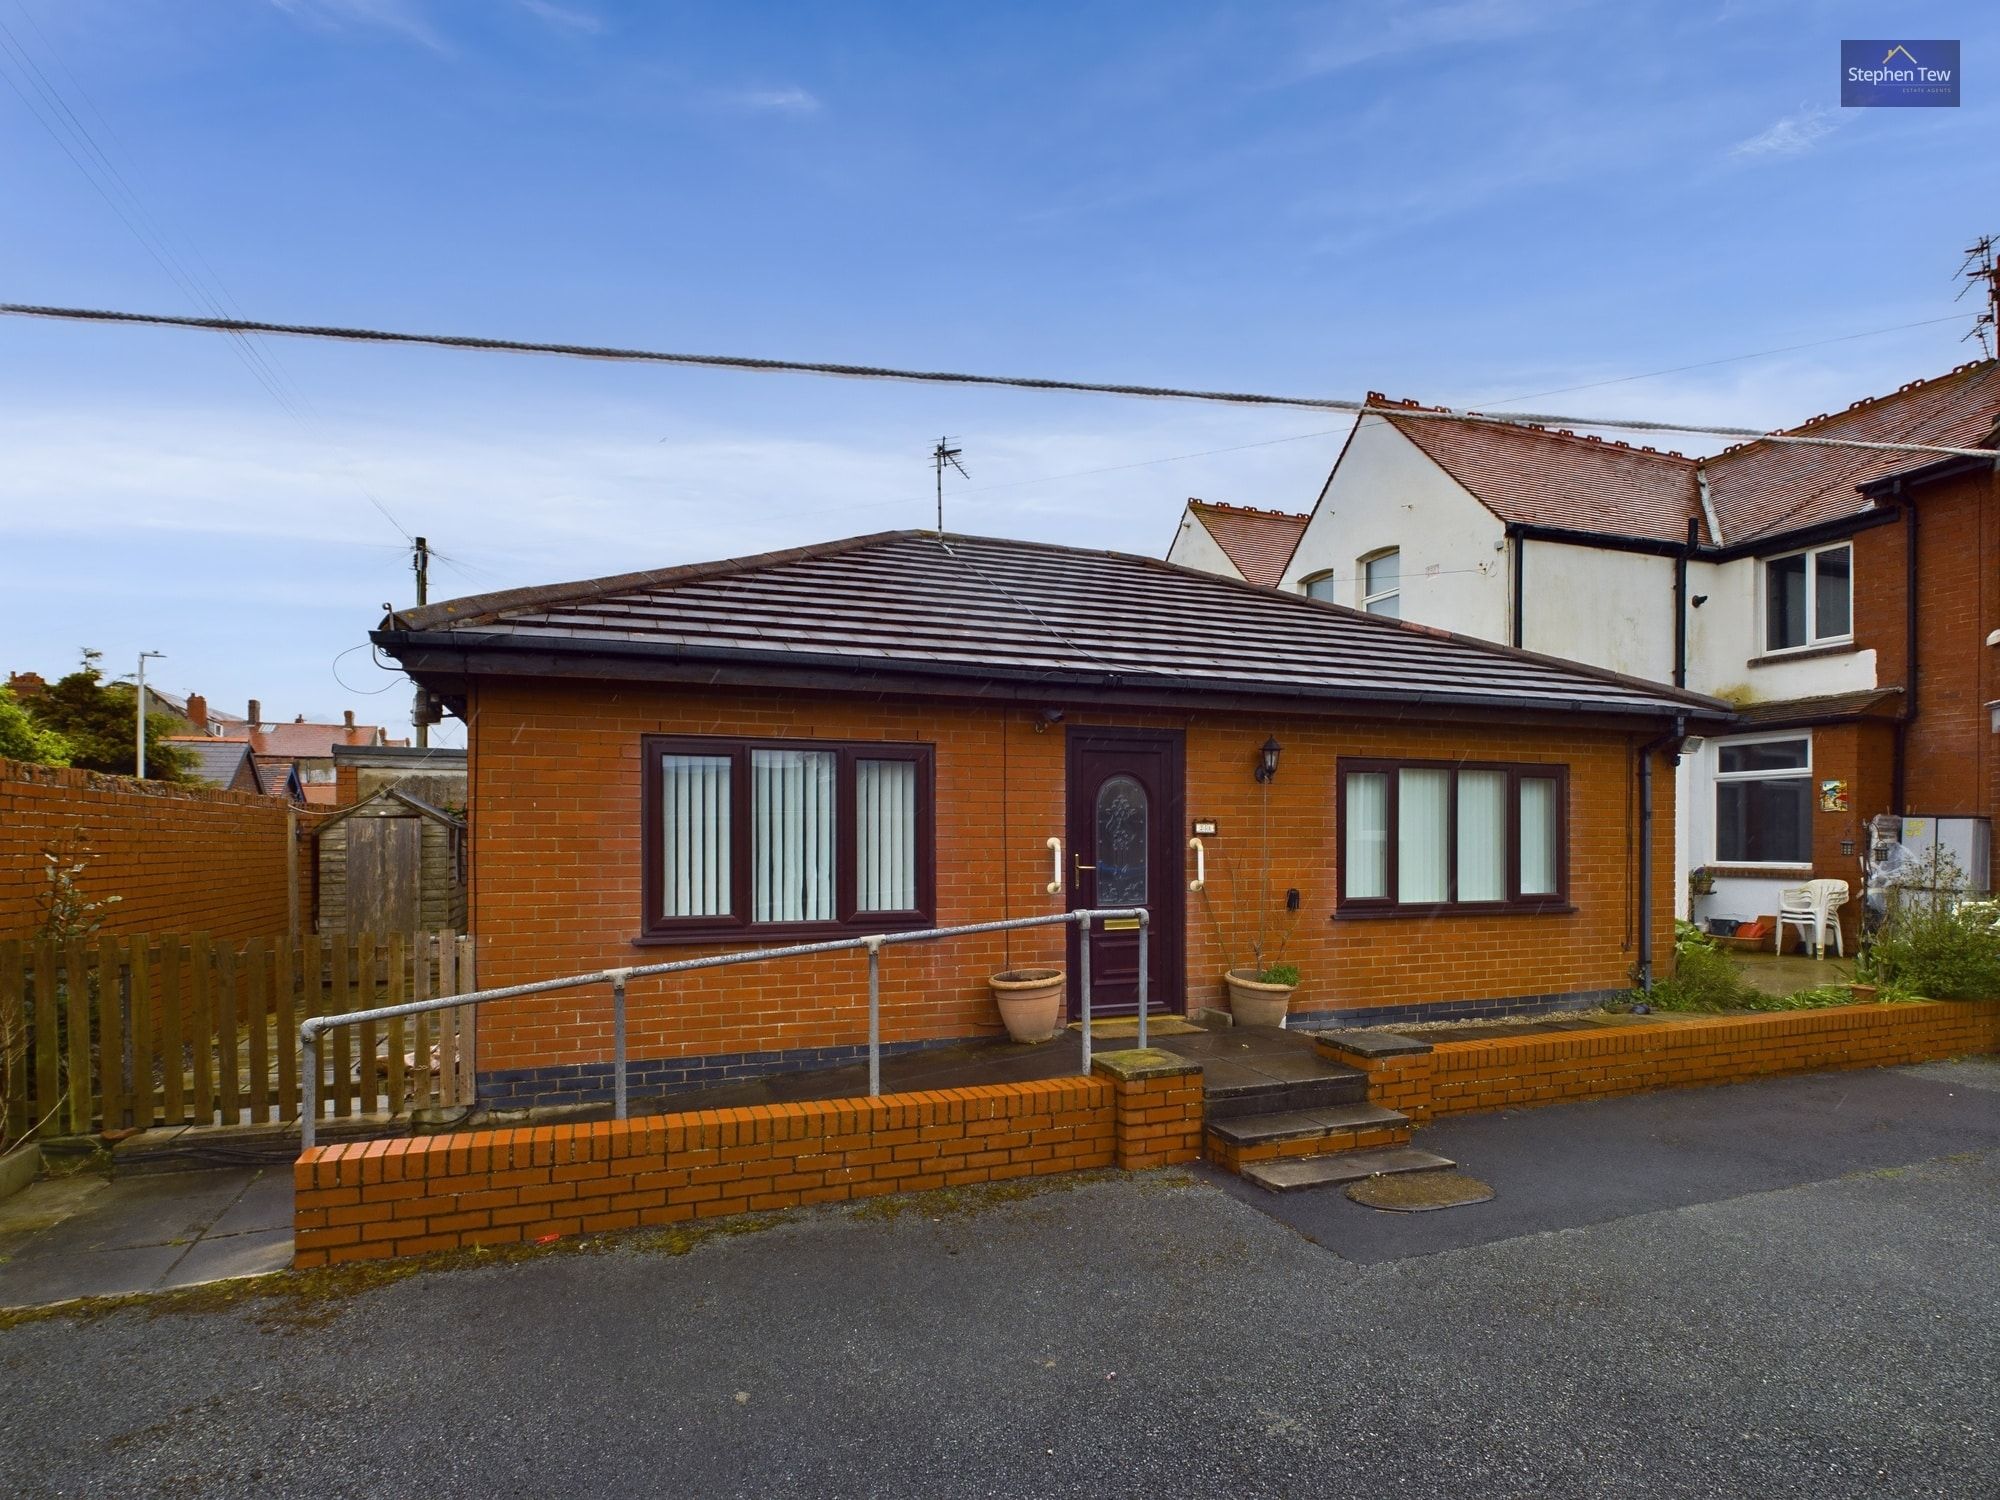 5, Springdale Court 25A Boscombe Road, Blackpool, Blackpool, FY4 1LW